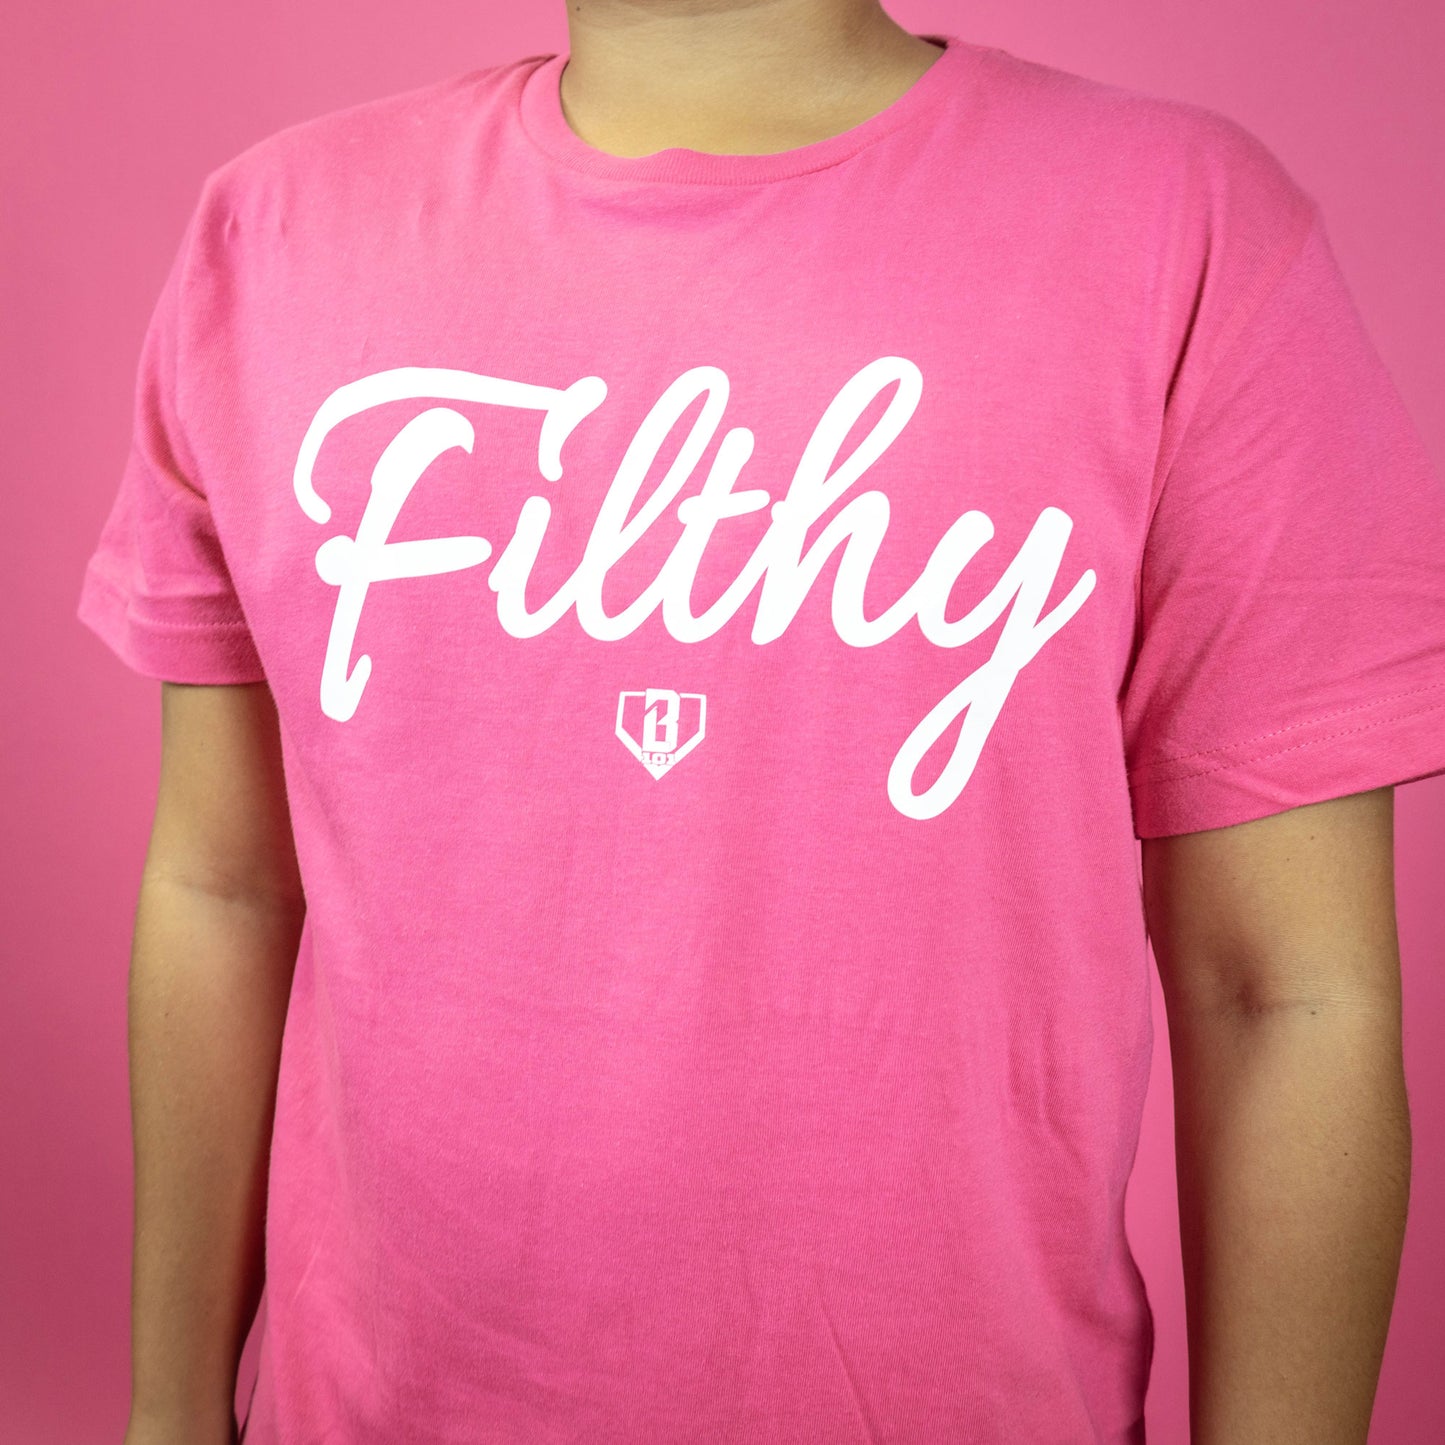 Filthy Youth Tee - Pink/White